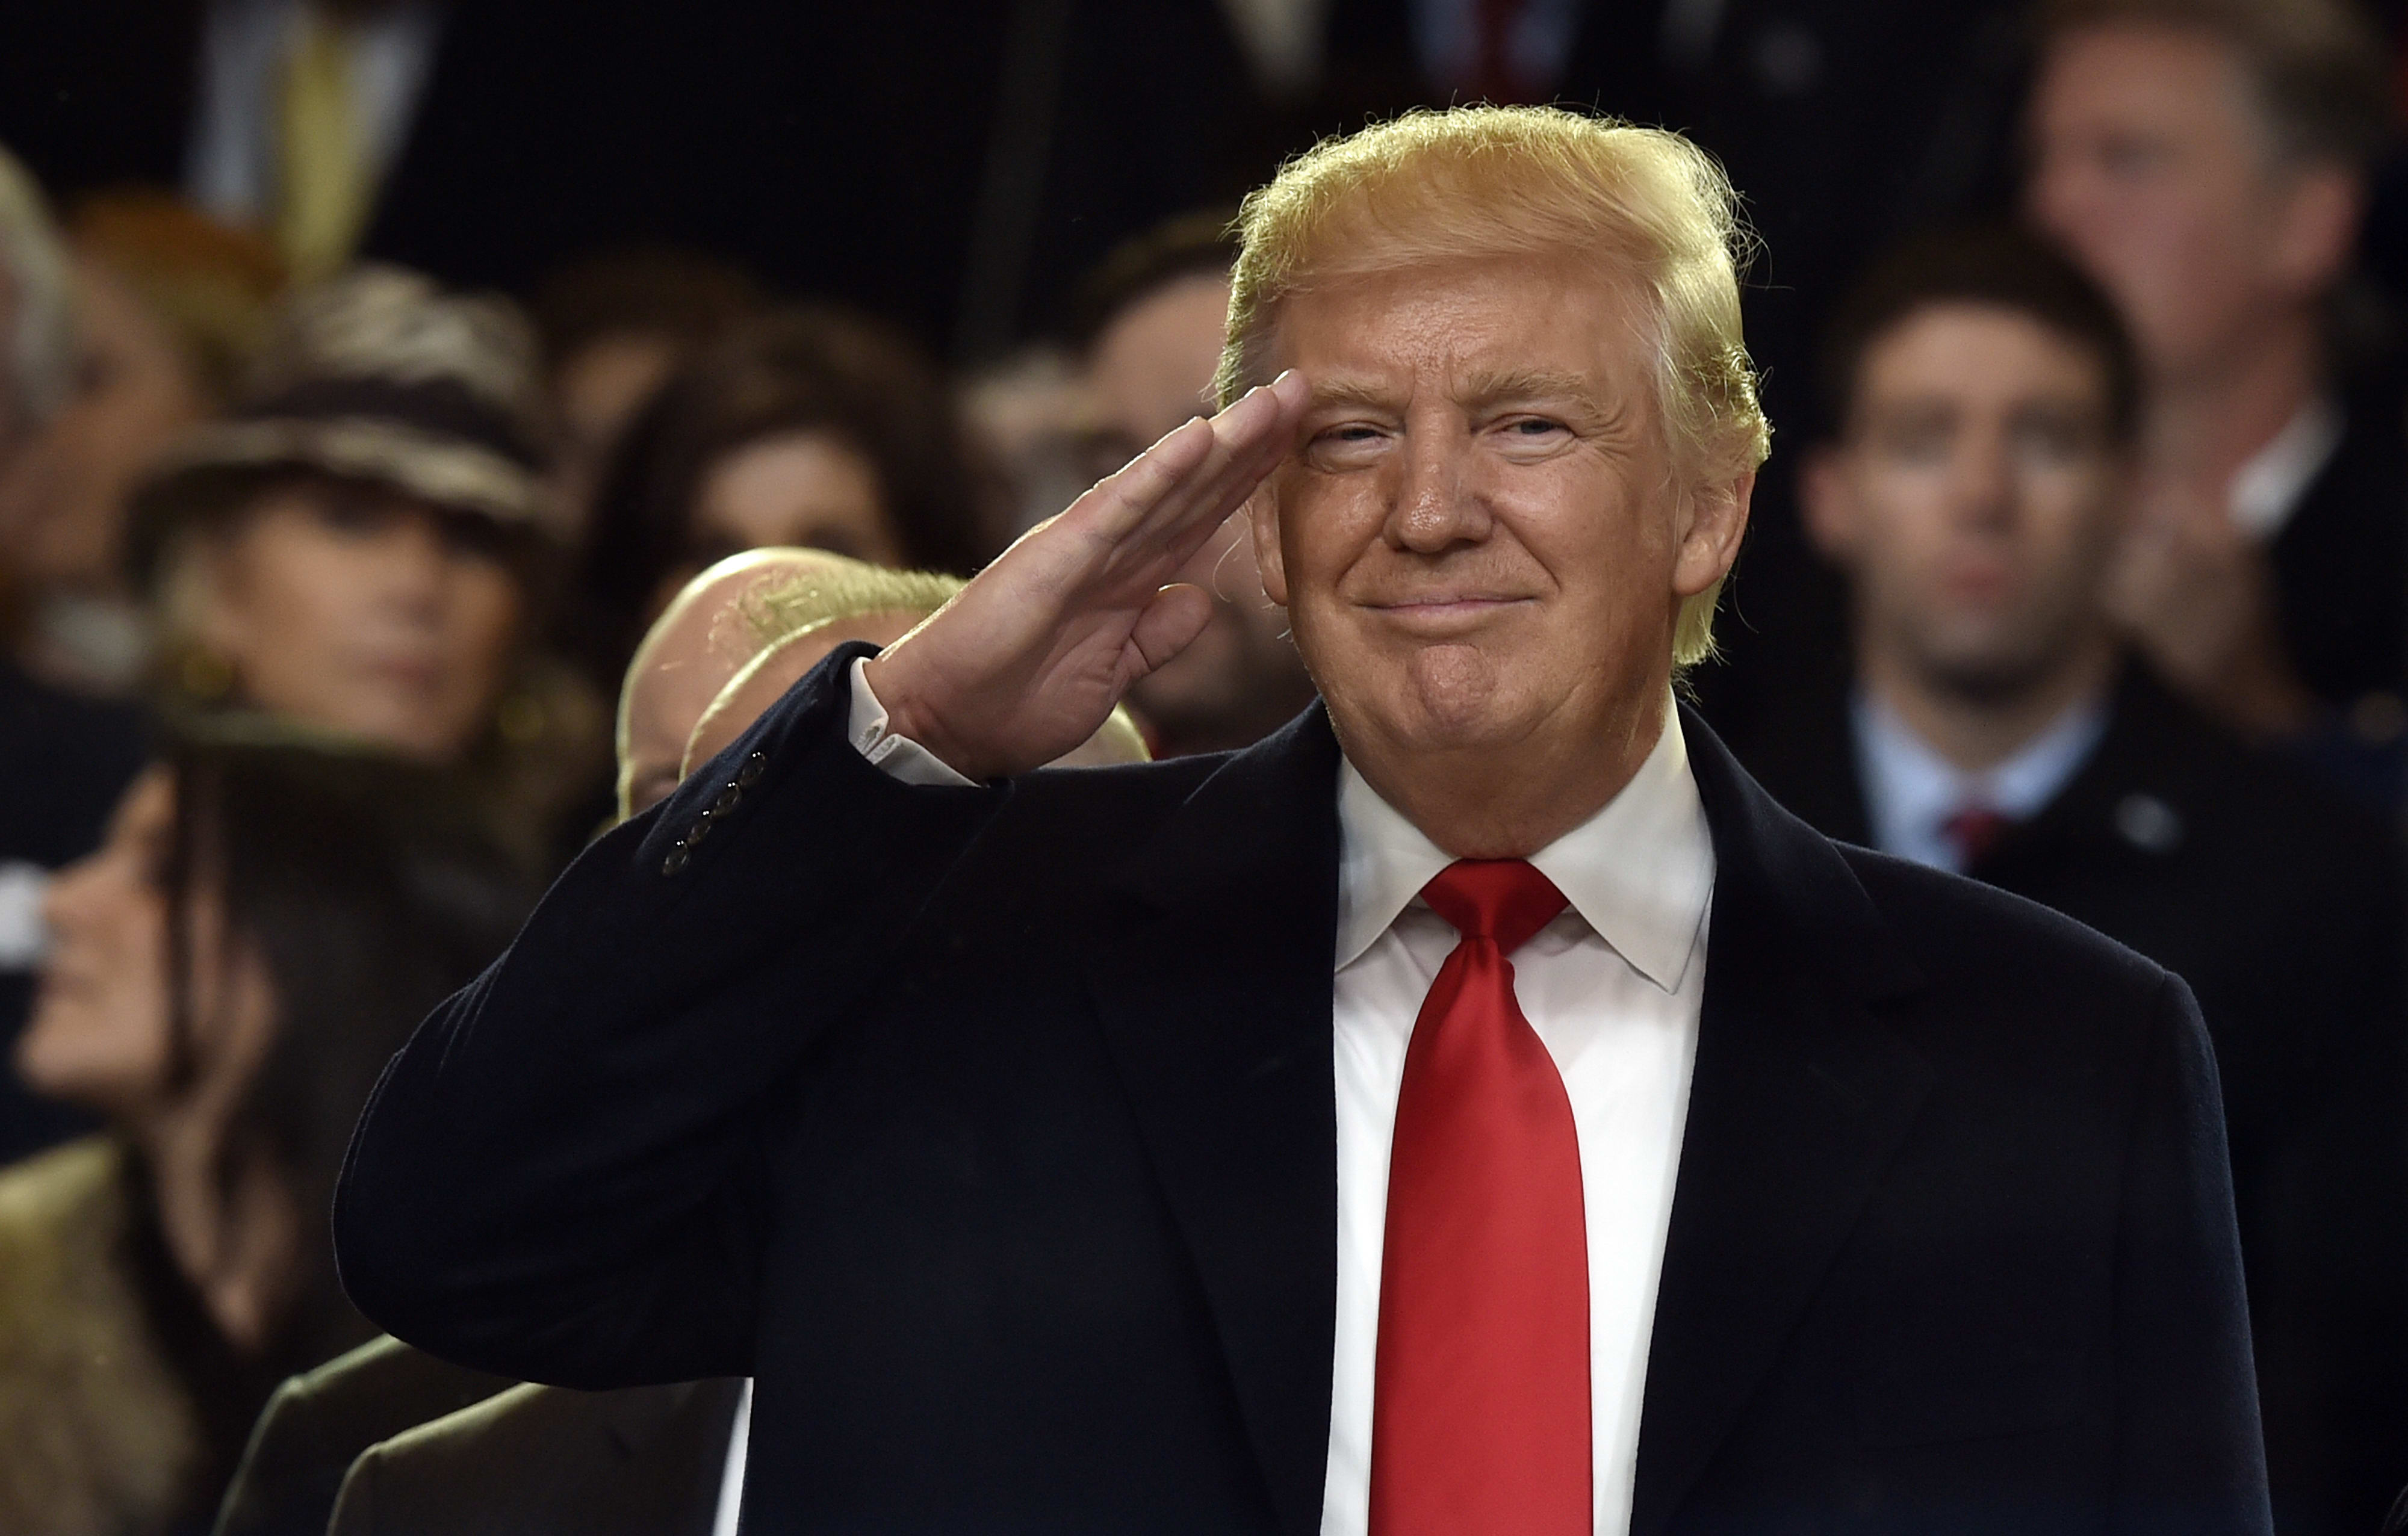 President Donald Trump salutes during the inauguration parade.